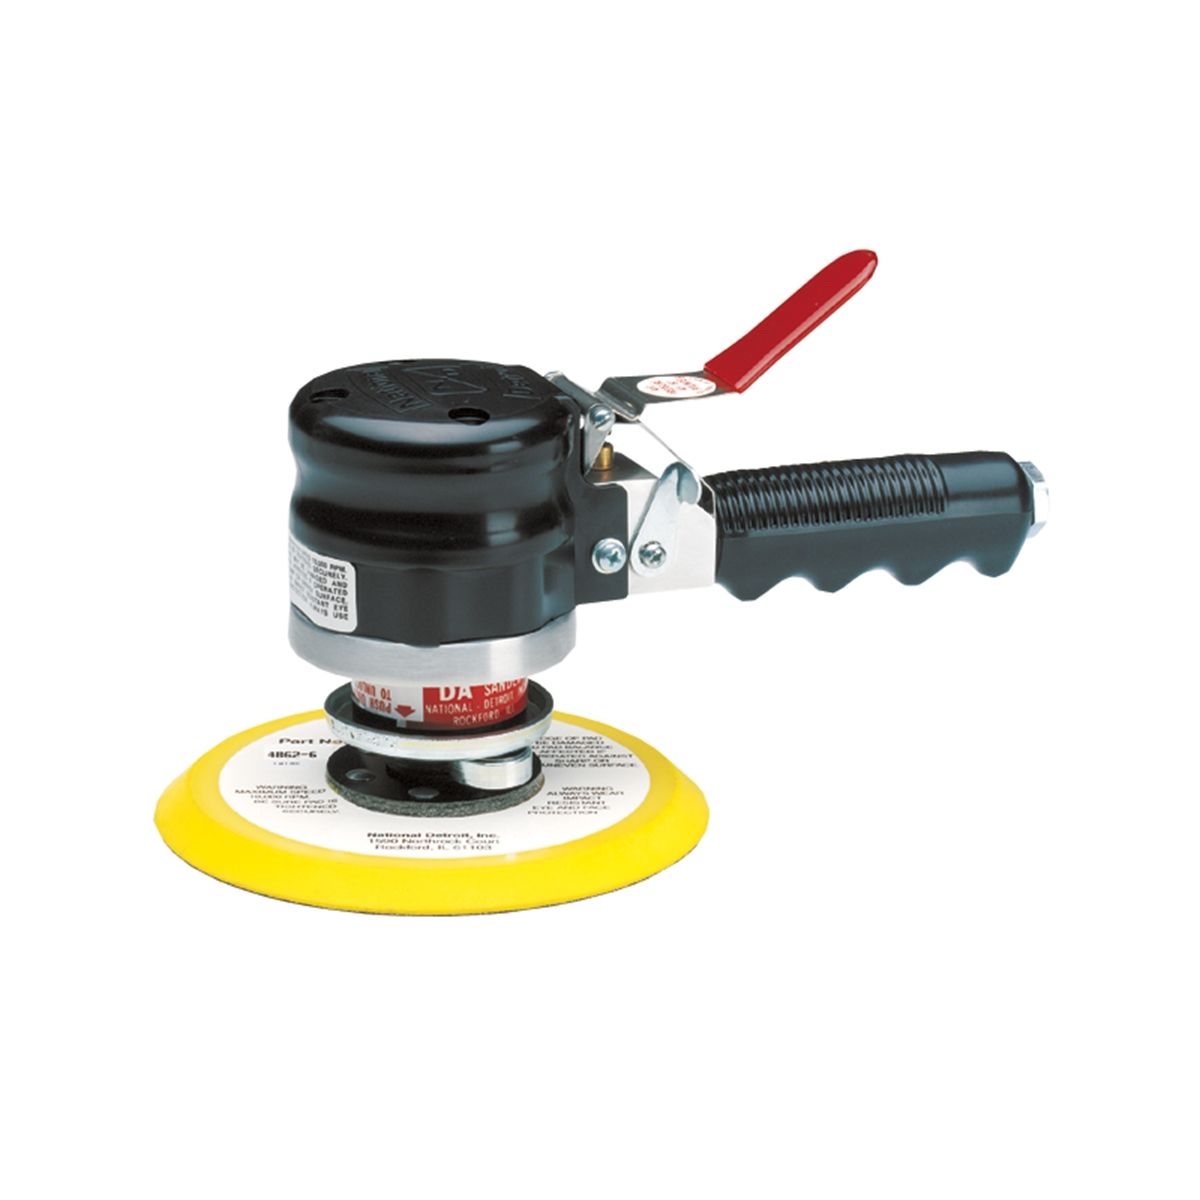 z-nla Lightweight Dual Action Air Sander 6 Inch Pa...